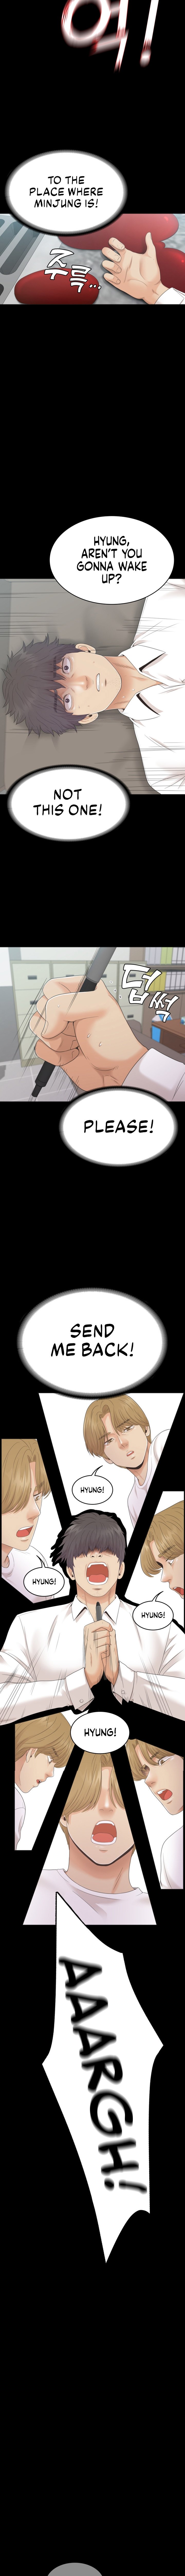 stuck-in-time-chap-20-6